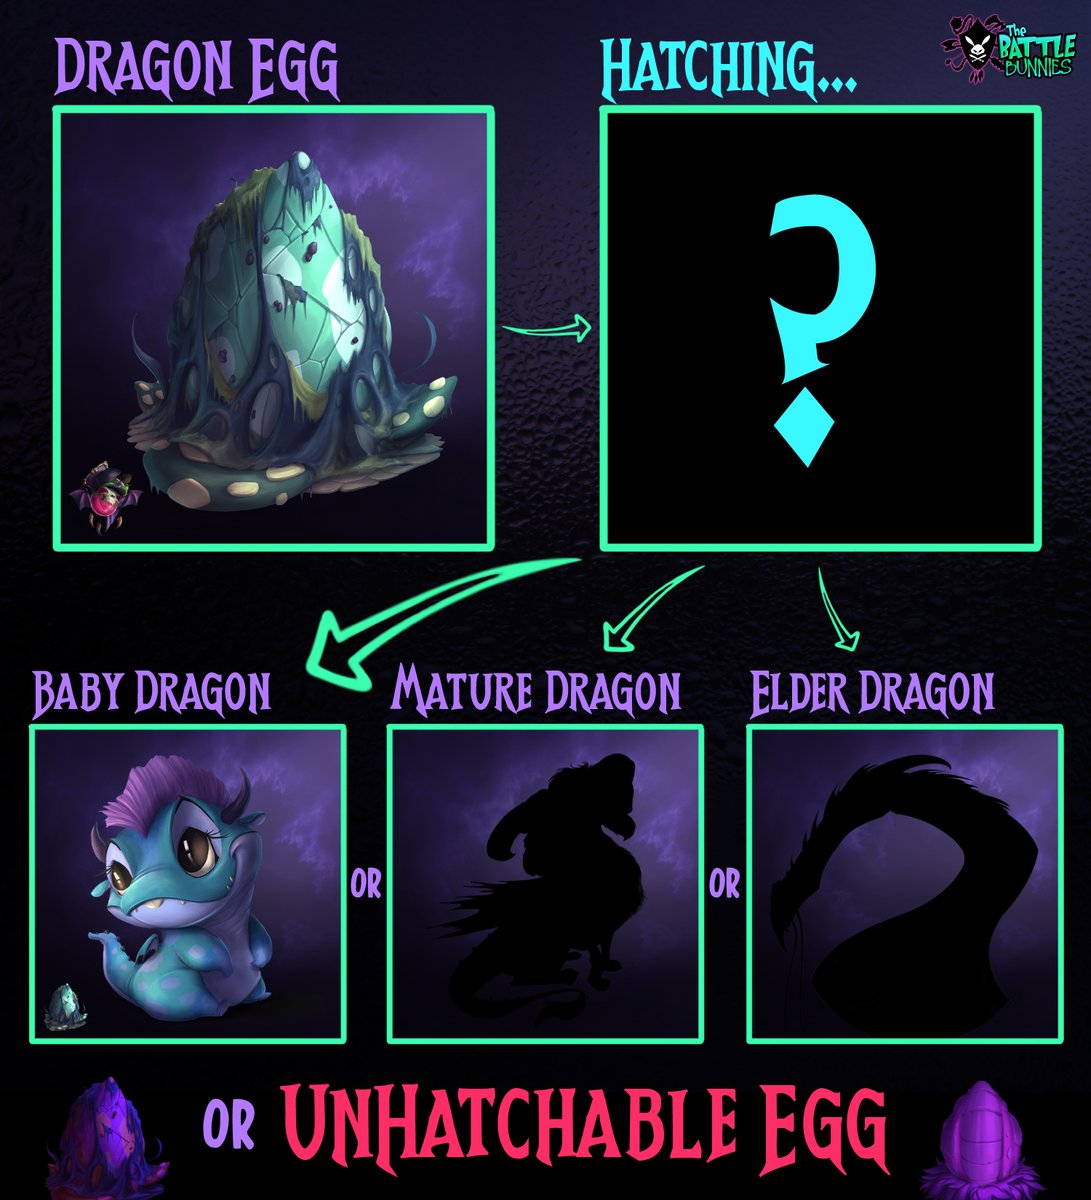 Who's got an UNHATCHABLE?? 👀

Find out Tonight!! 😱

7pm in #Discord 🔥🔥🔥

#Dragons #flufflefam #BattleBunnies #hatching #party #Birthday #NFTCollector #Reveal #FridayFeeling #FridayVibes #TGIF #LetsGo